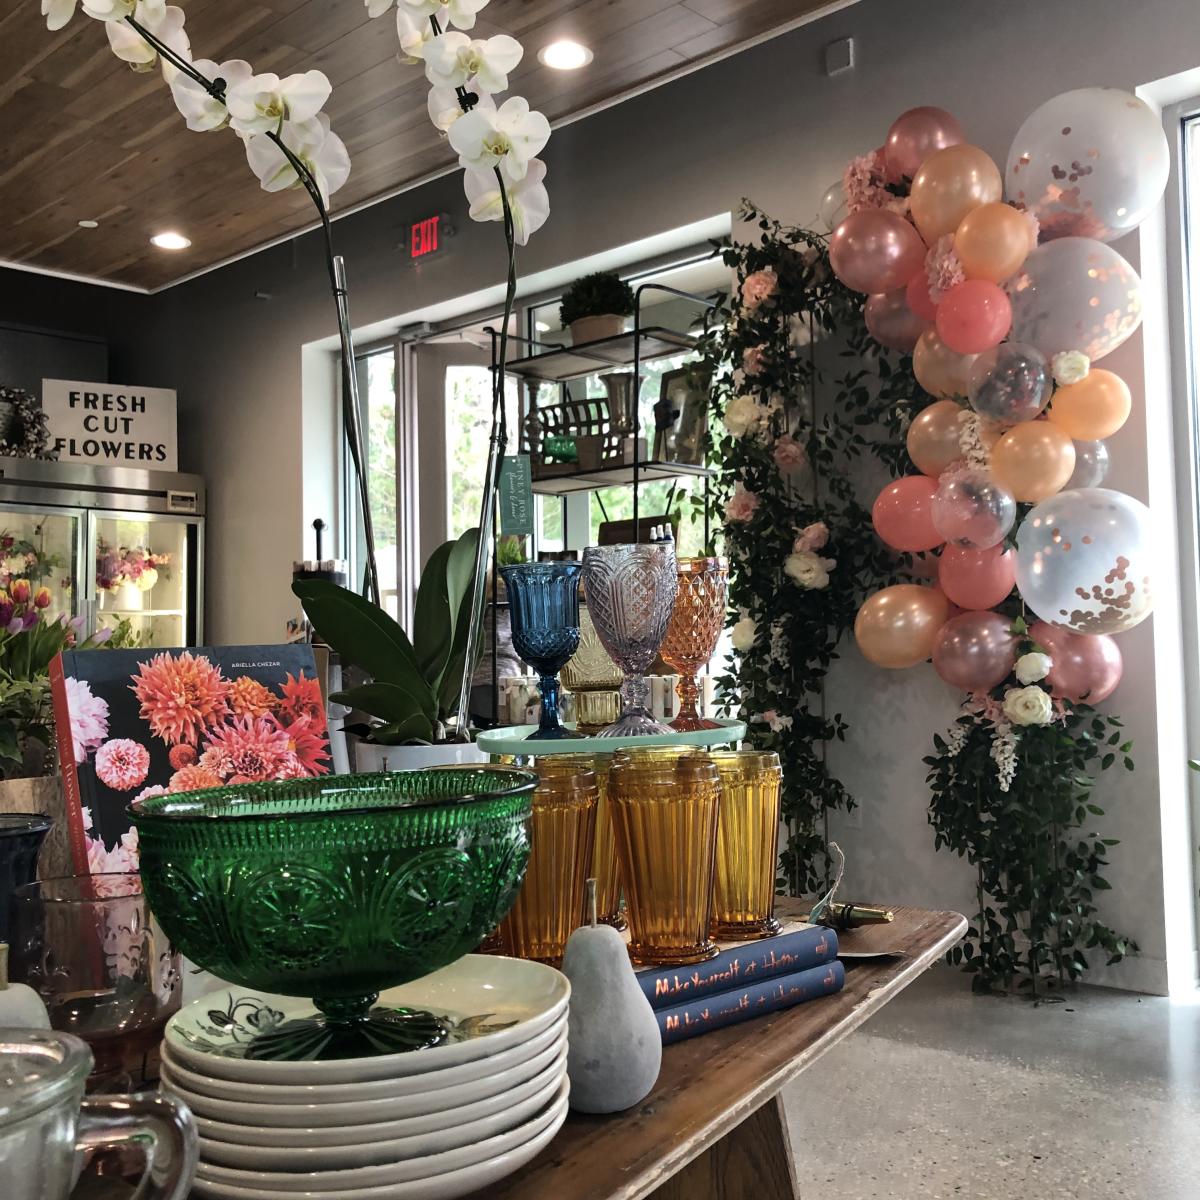 Piney Rose is no ordinary flowers shop. (Courtesy Visit The Woodlands)